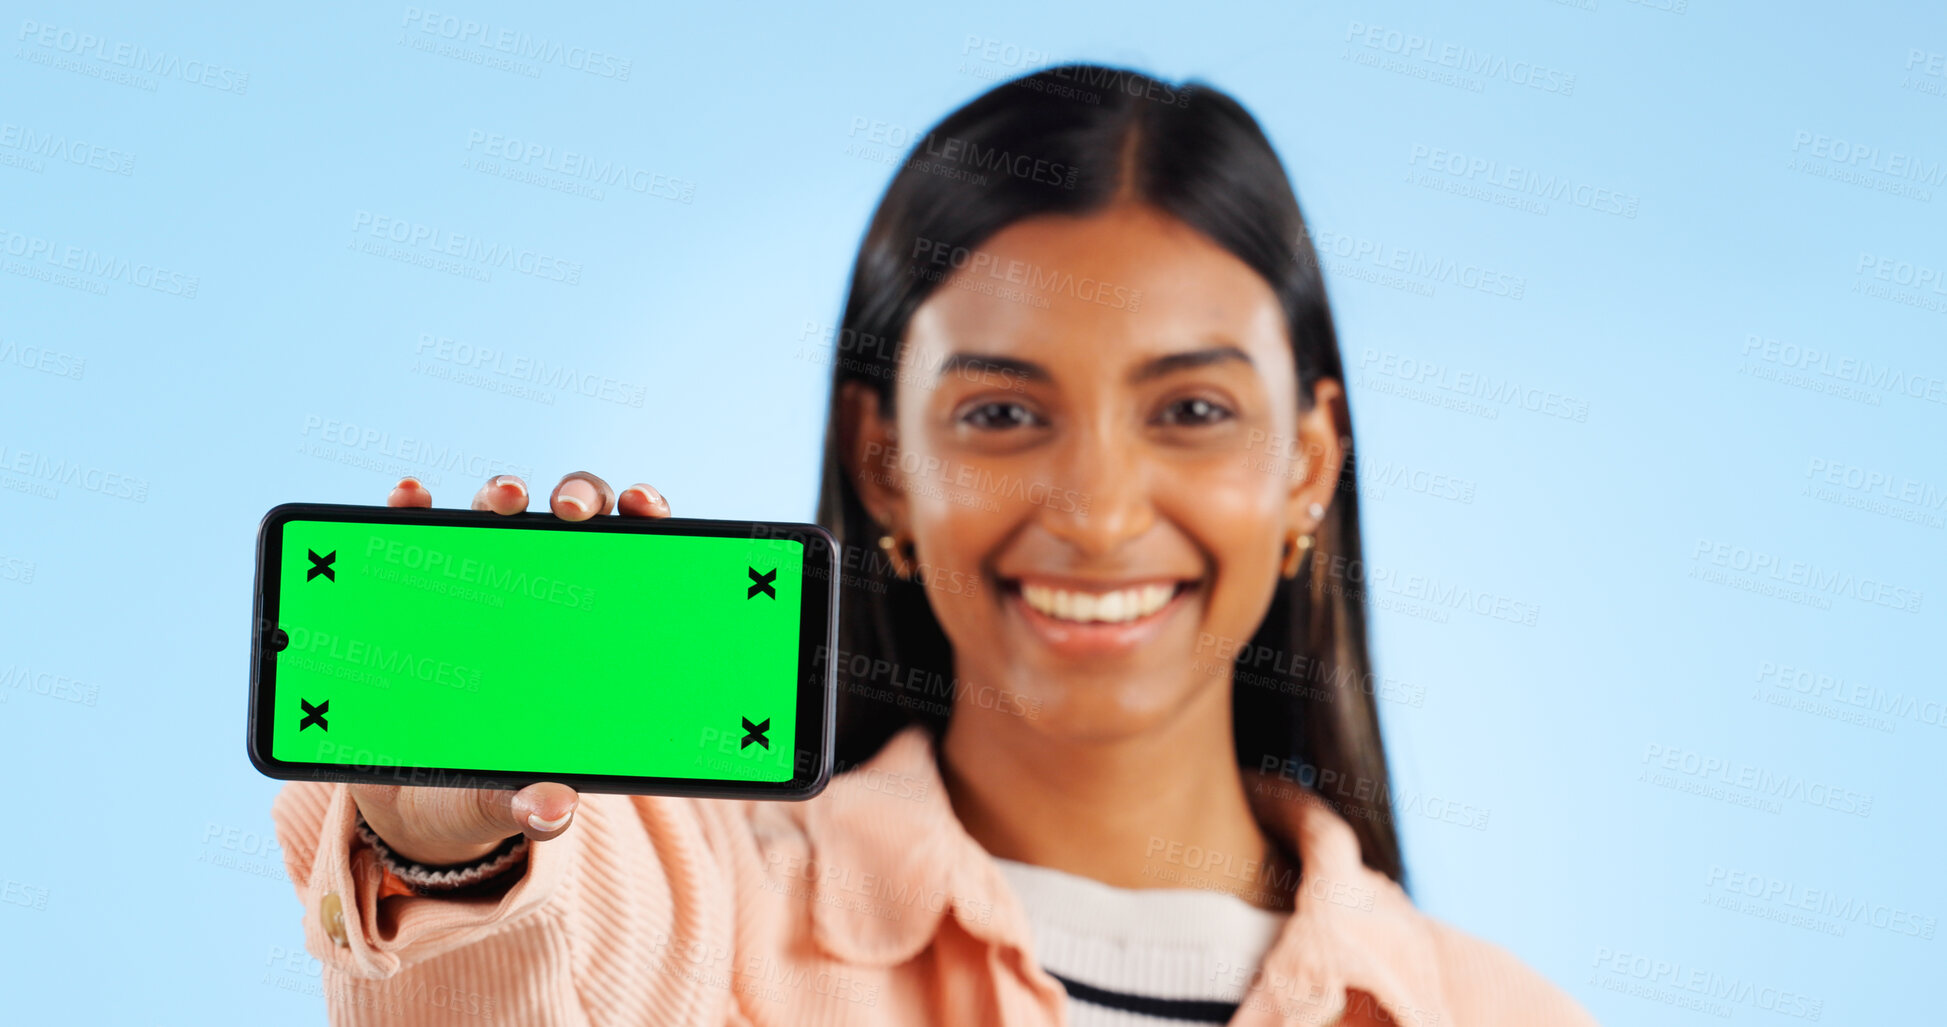 Buy stock photo Smartphone green screen, studio portrait and happy woman show internet connection, mobile promotion or app chroma key. Tracking markers, cellphone mockup space and tech person face on blue background